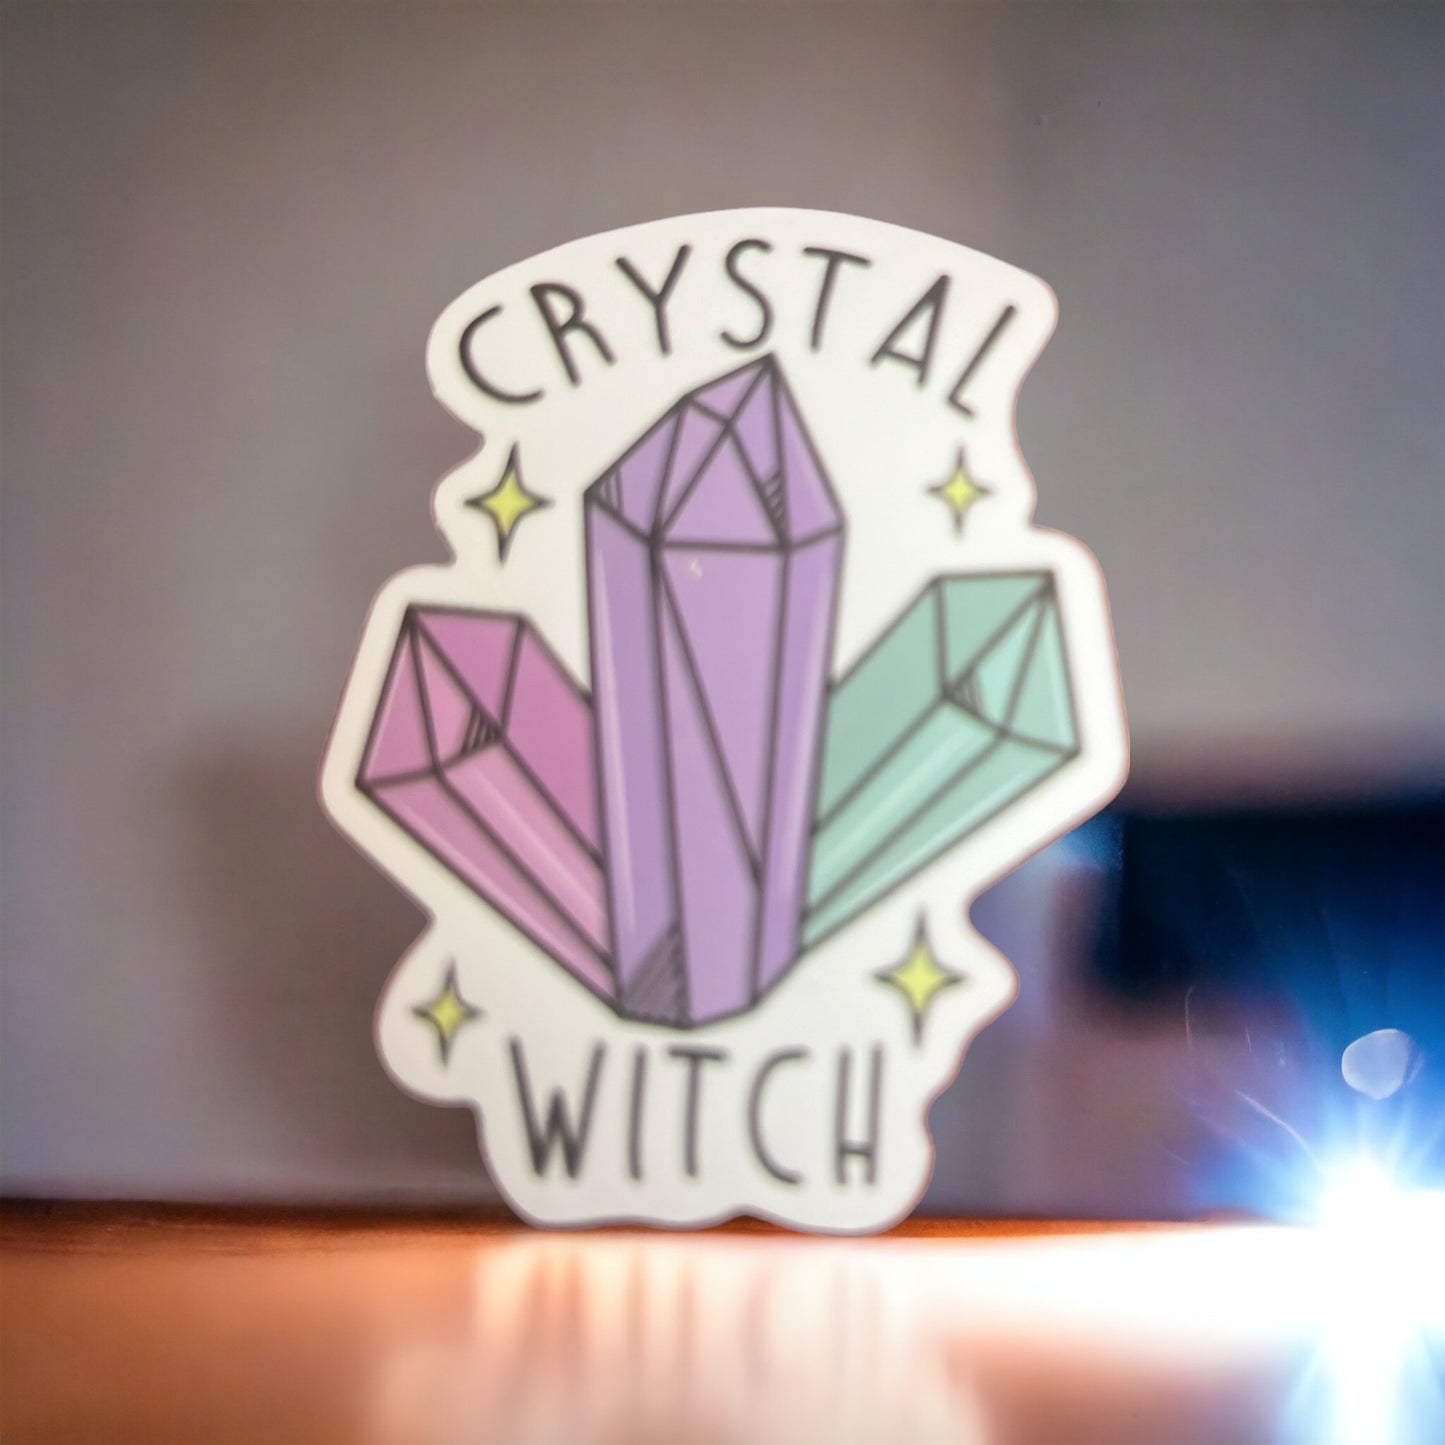 Crystal Witch